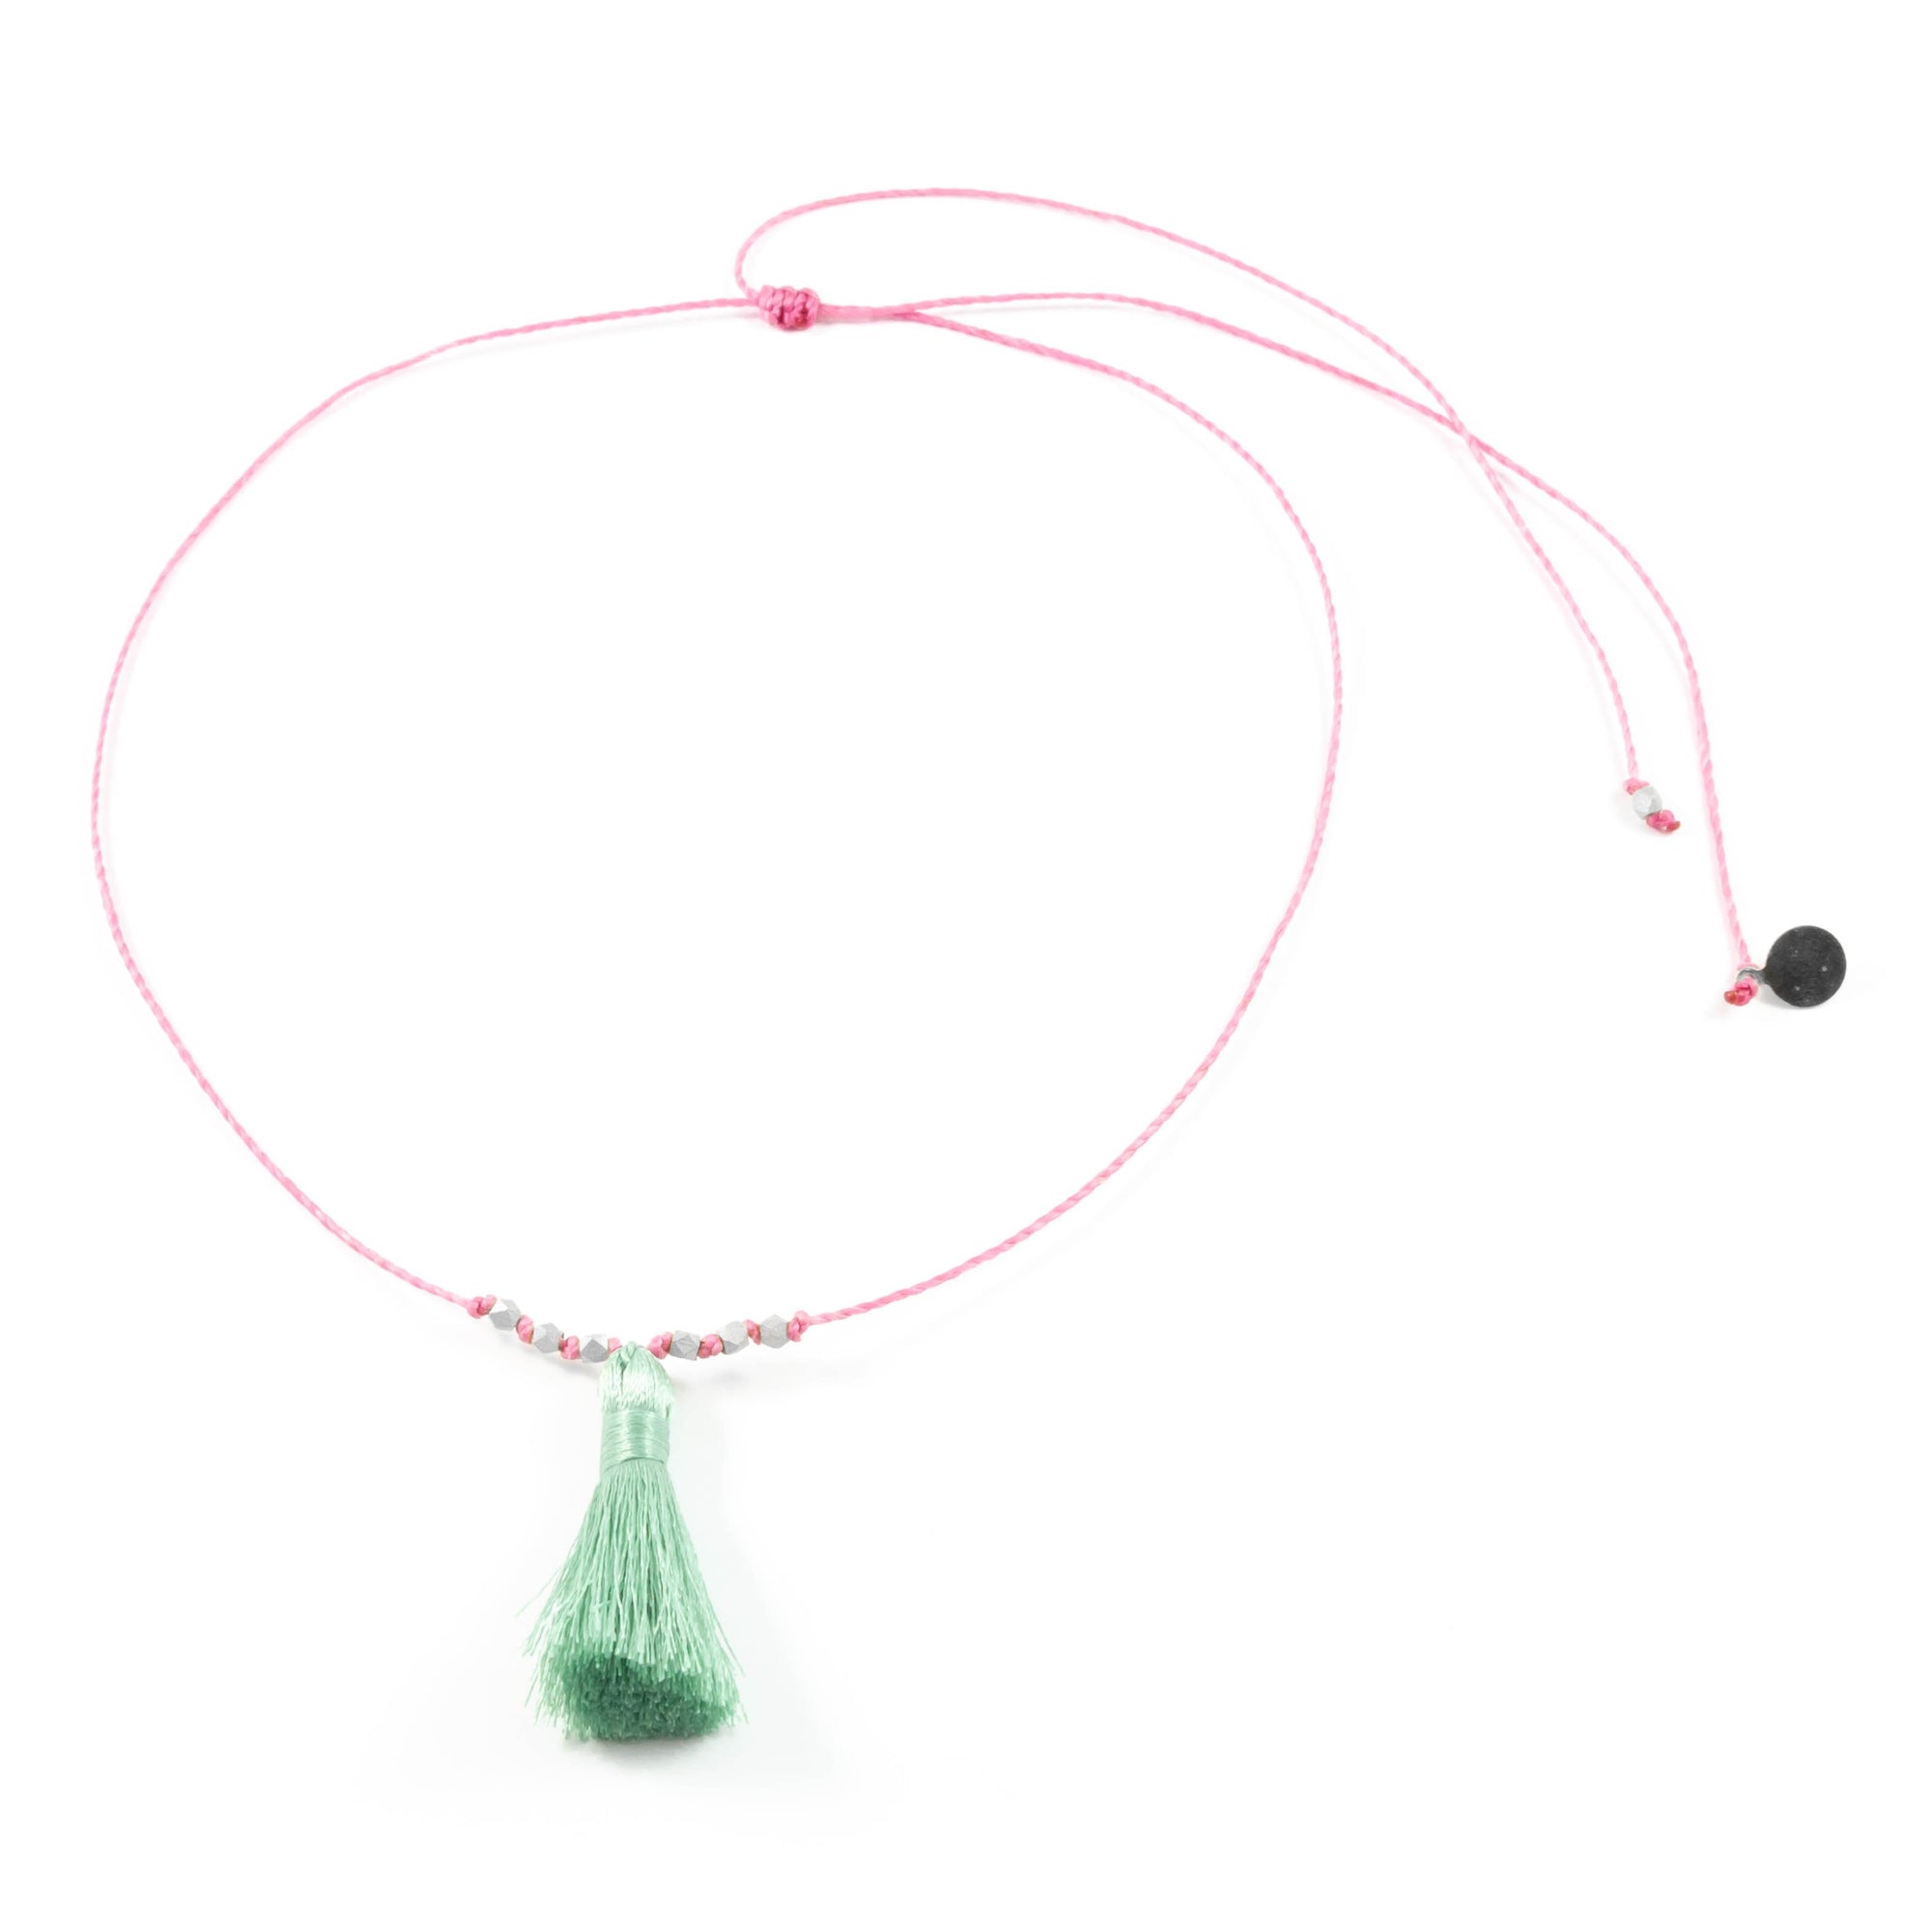 Rose w/ Cucumber Tassel On a String Necklace in Silver